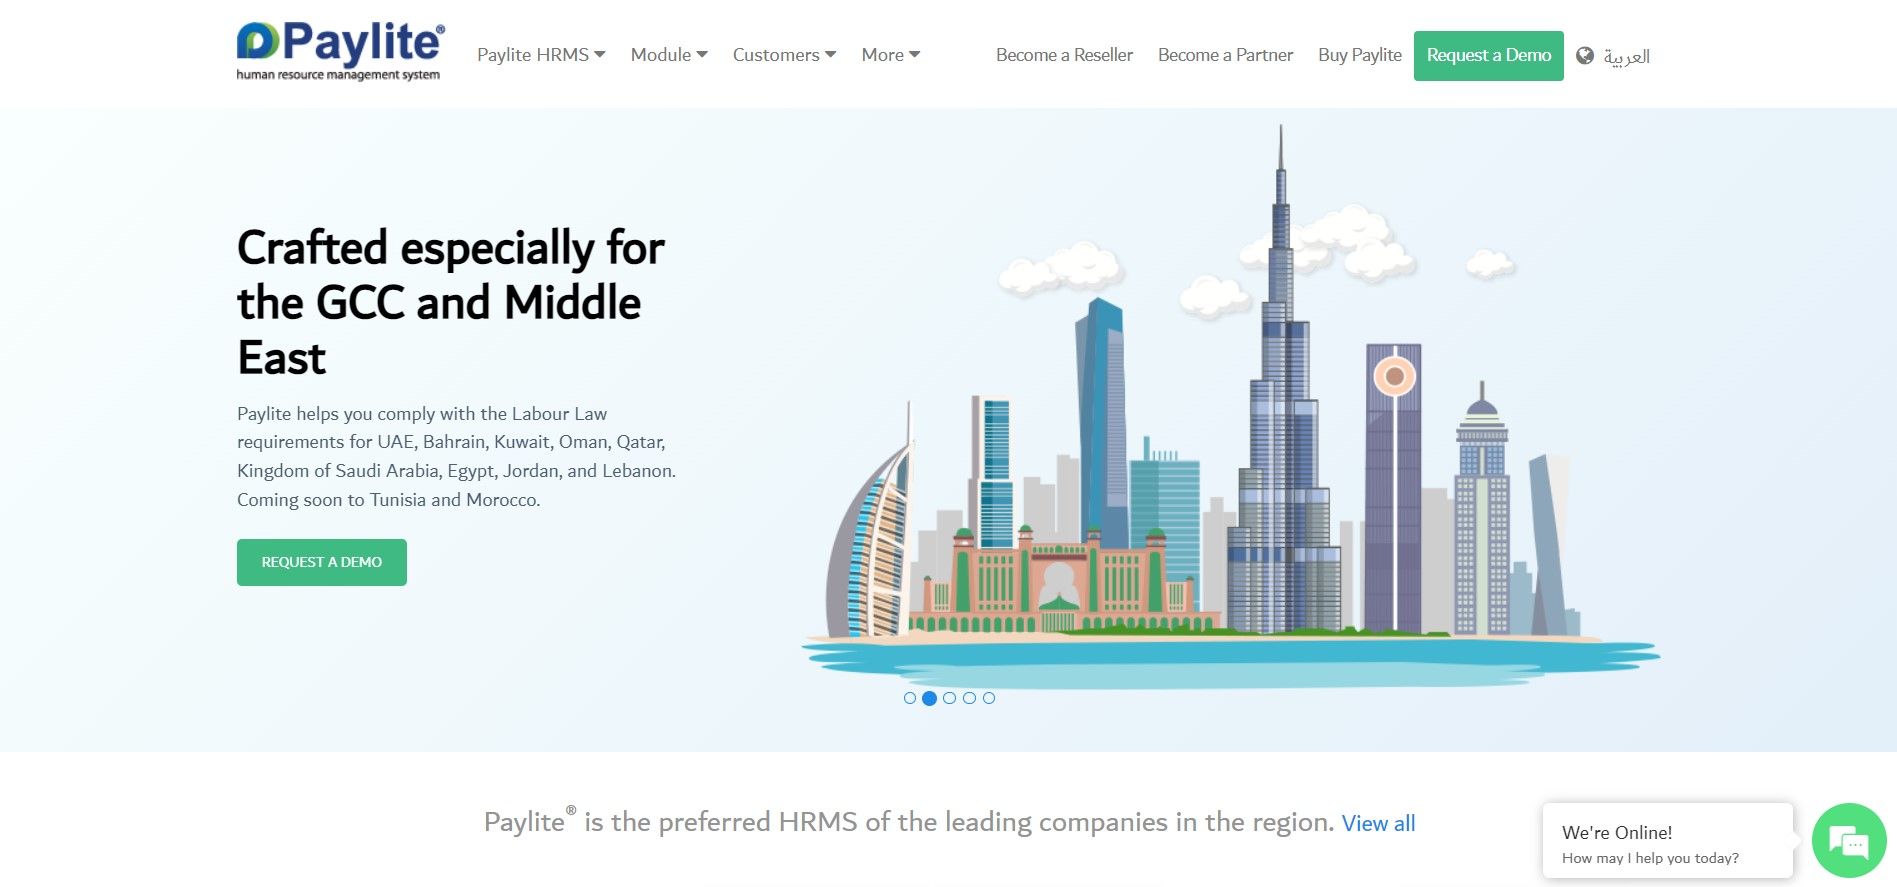 An image of Paylite HRMS, mentioning crafted specially for GCC and Middle East